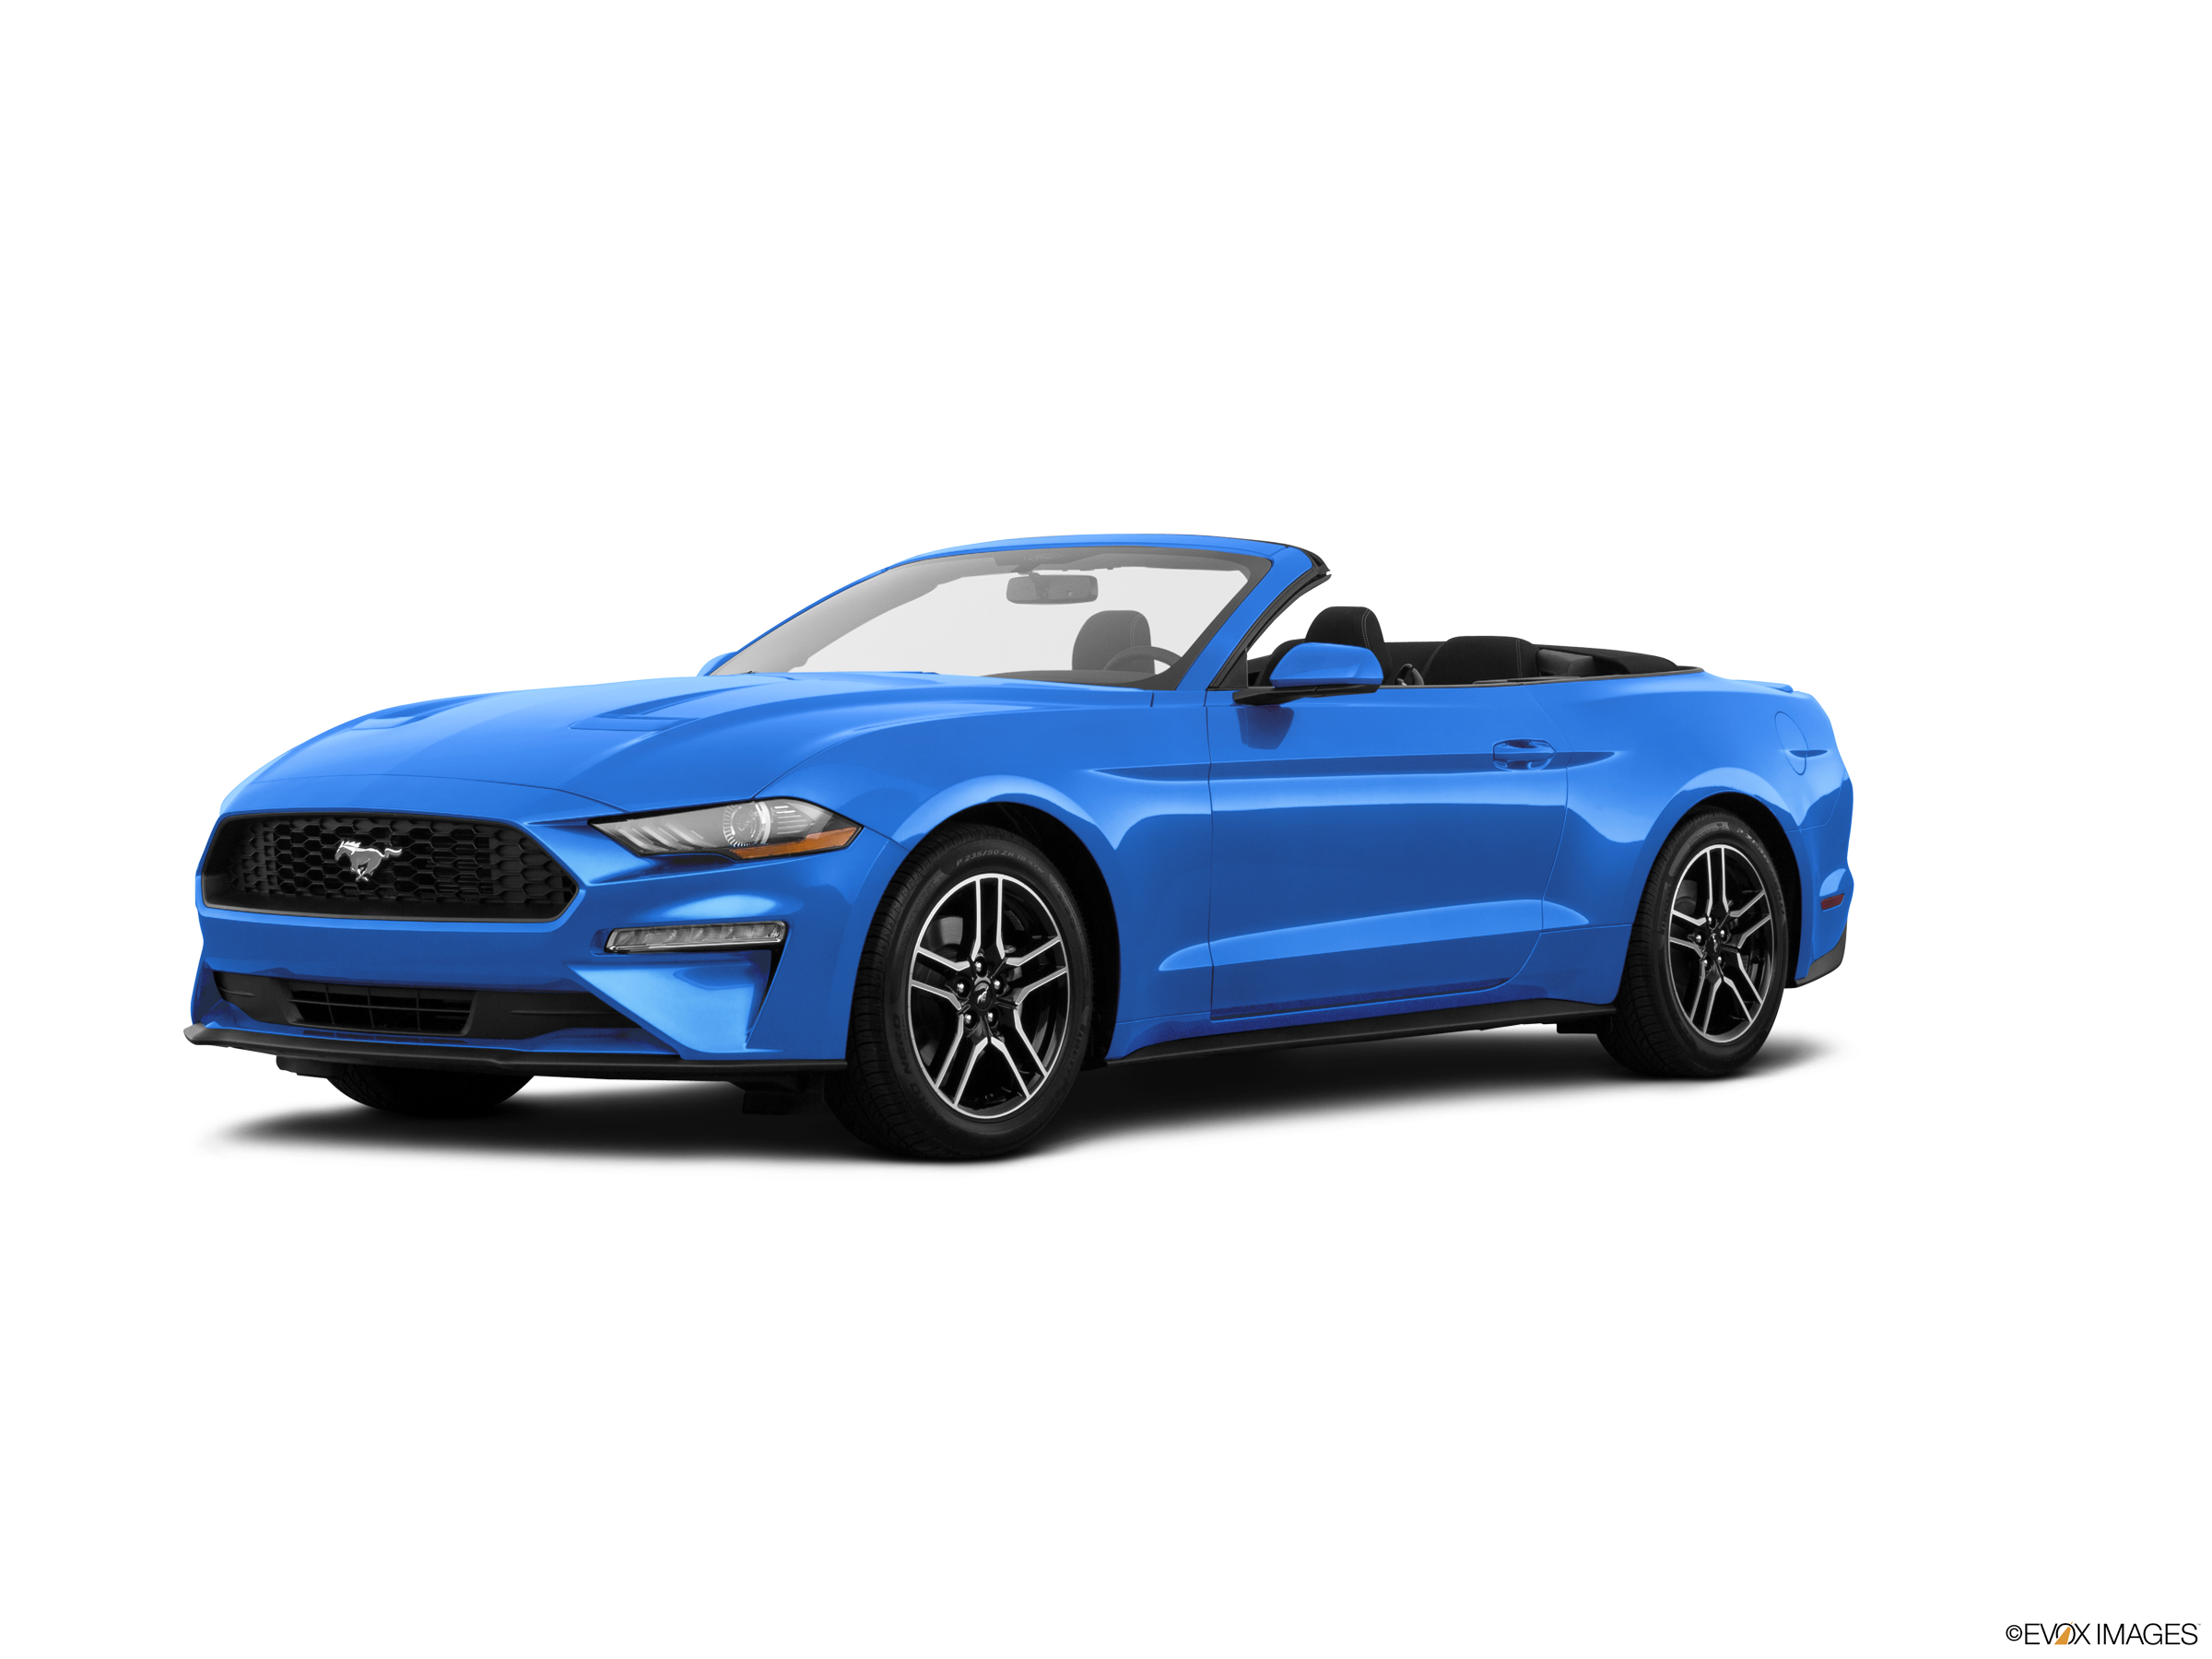 Ford Mustang GT convertible